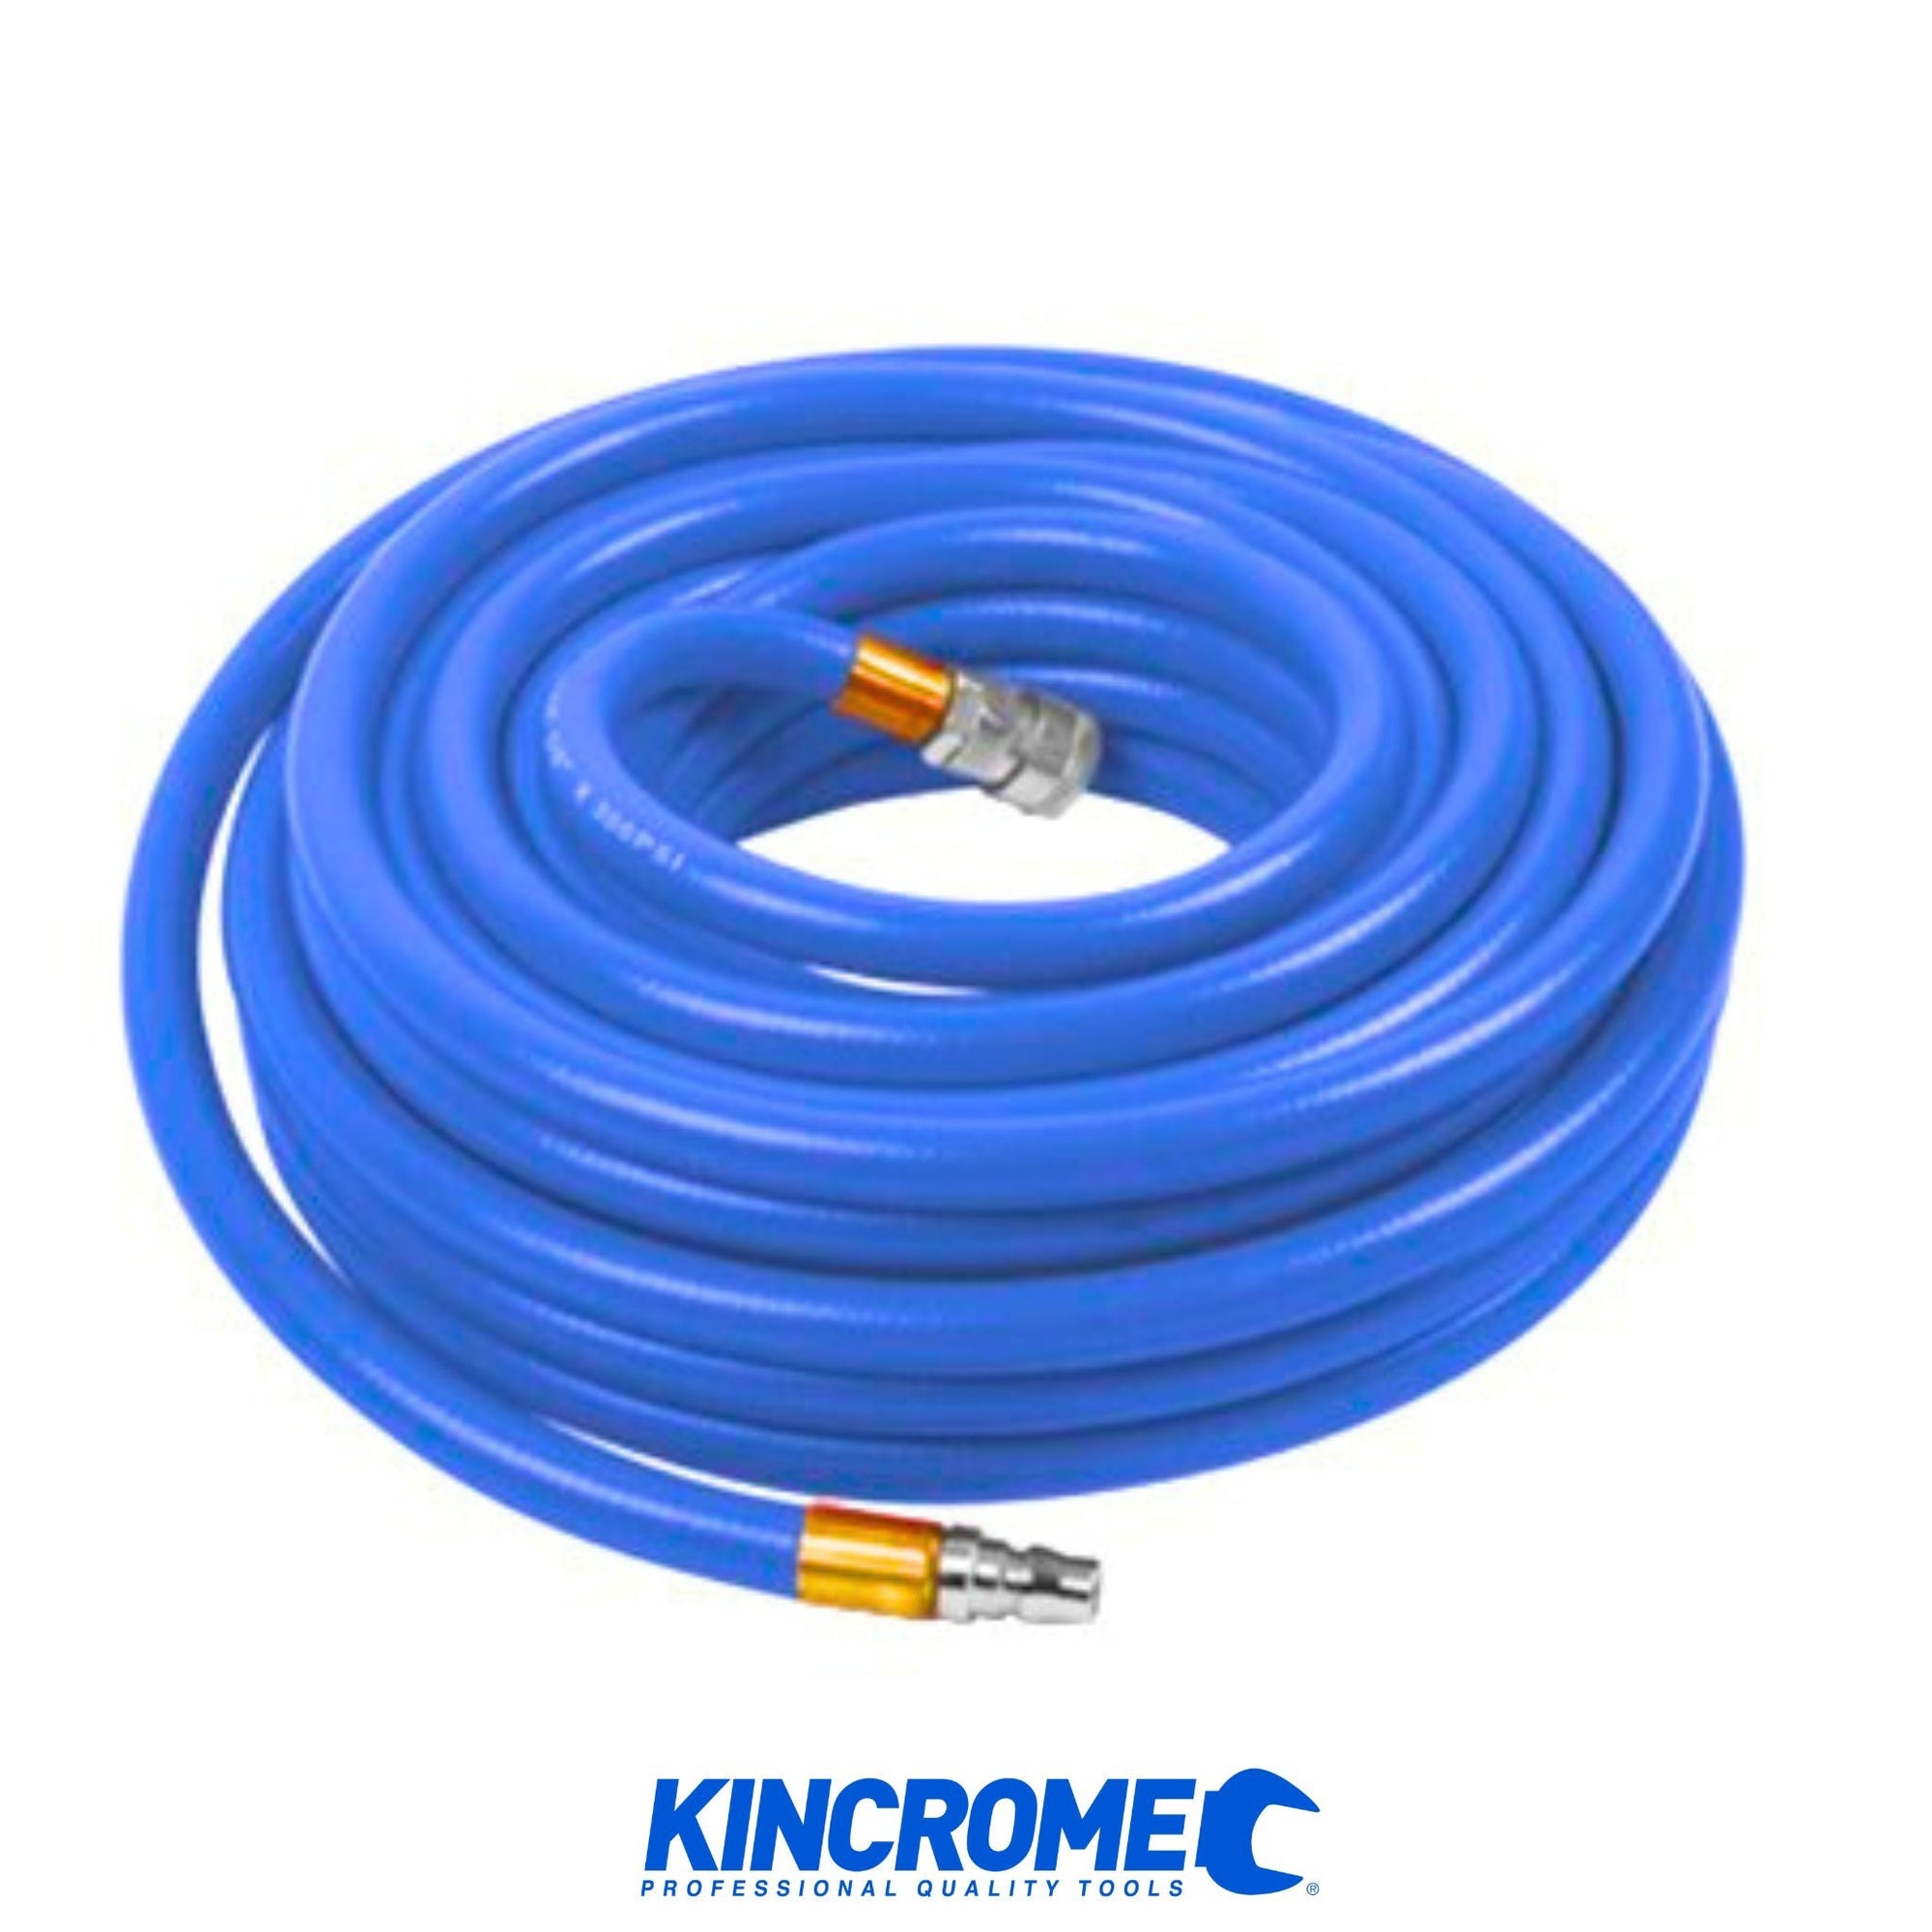 Kincrome K13150 - 15M x 10MM NITTO Air Hose - South East Clearance Centre